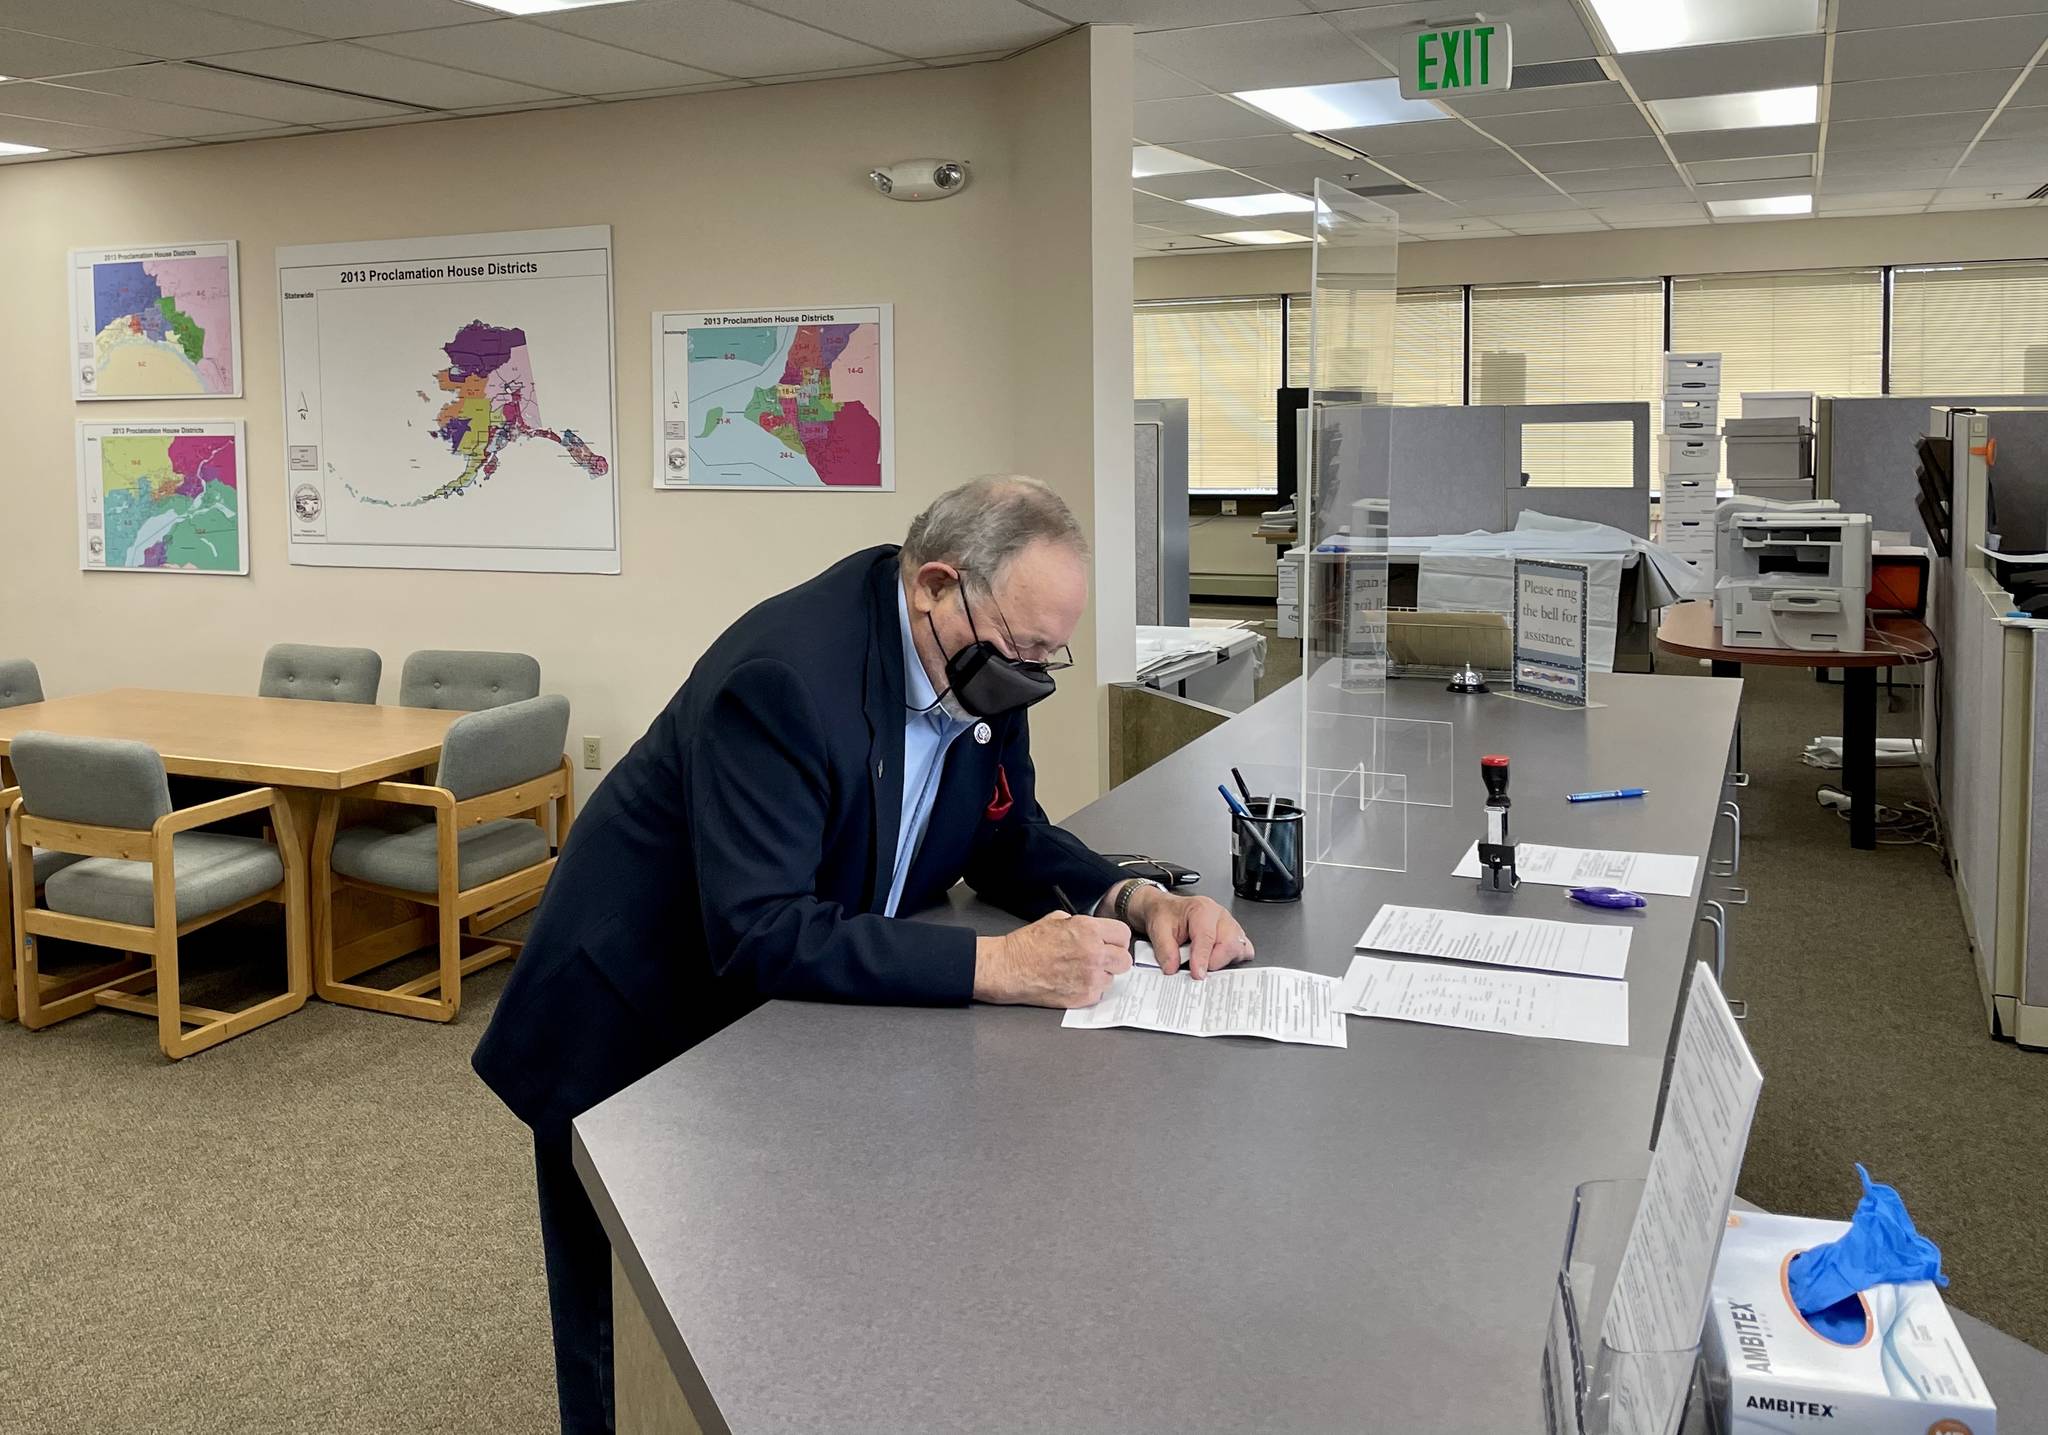 U.S. Rep. Don Young, R-Alaska, announced Wednesday he had filed for reelection and would seek a 26th term as Alaska’s lone U.S. representative. (Courtesy Photo / Alaskans for Don Young)